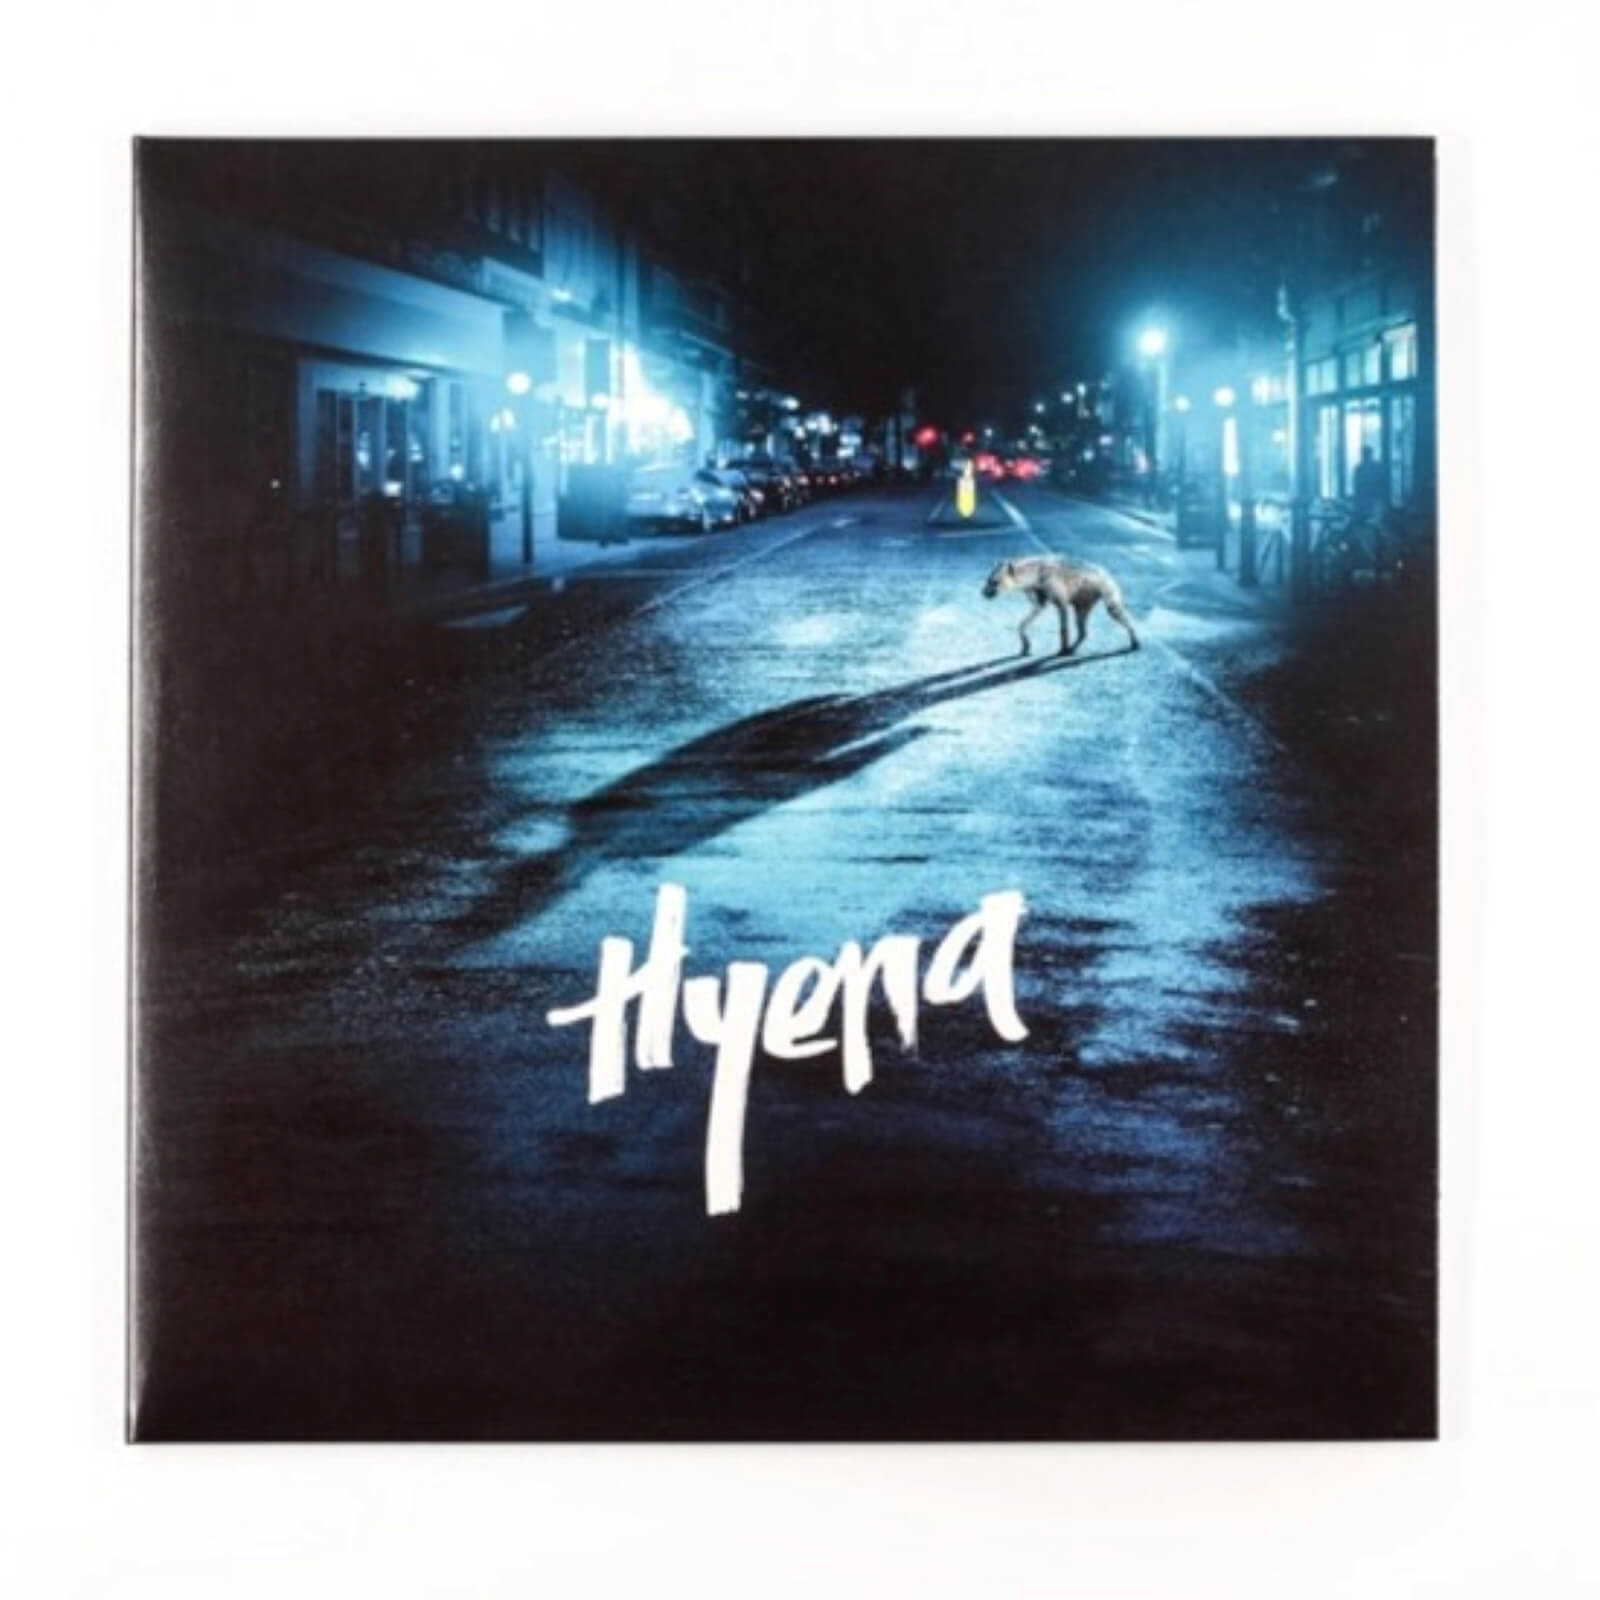 Death Waltz Recording Co. - Hyena (A Soundtrack By The The) 140g 2xLP